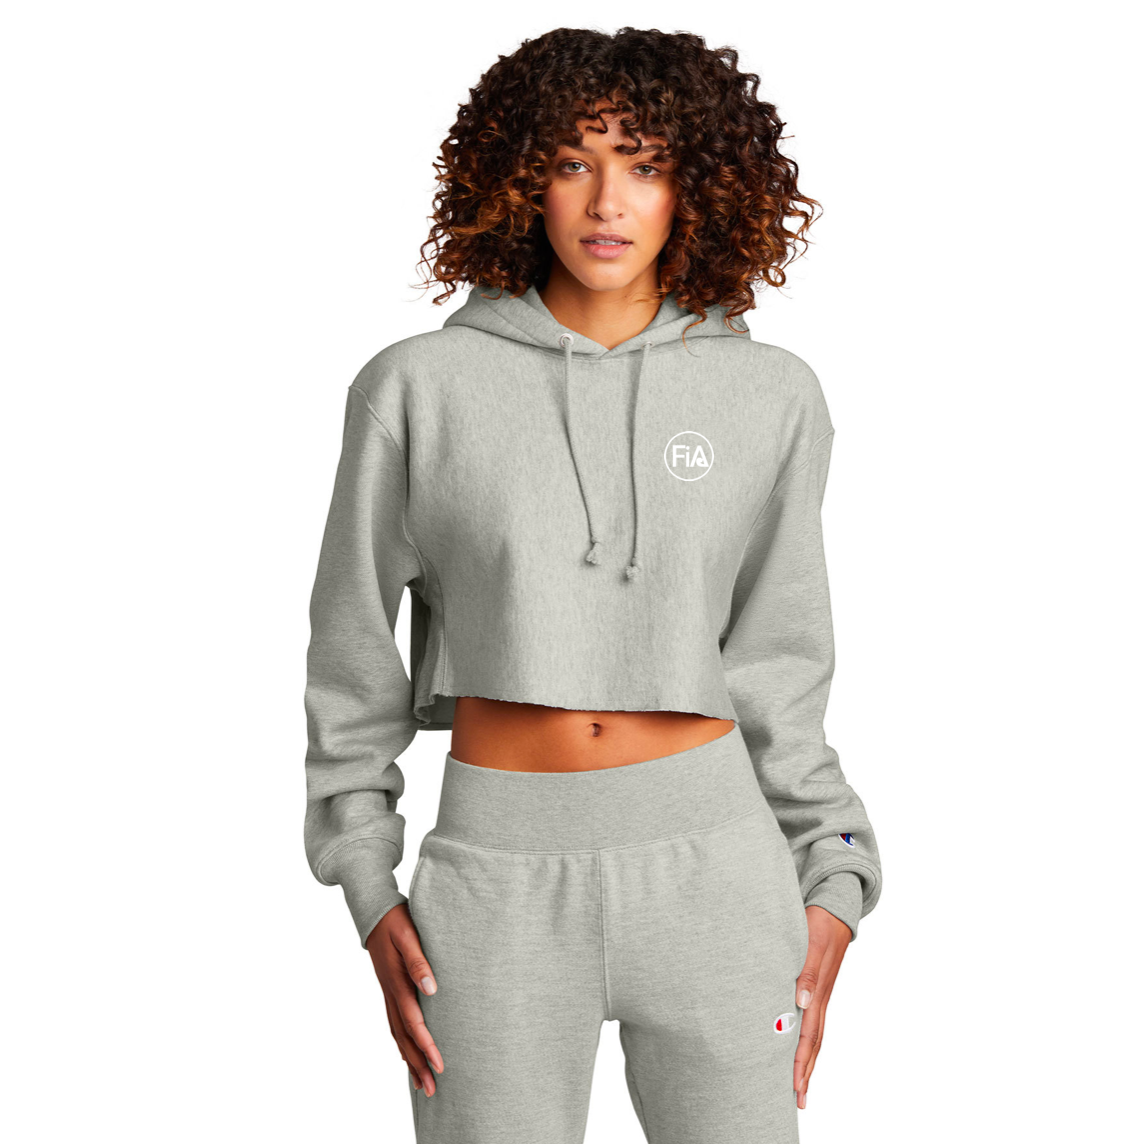 FiA Champion Women’s Reverse Weave Cropped Cut-Off Hooded Sweatshirt - Made to Order